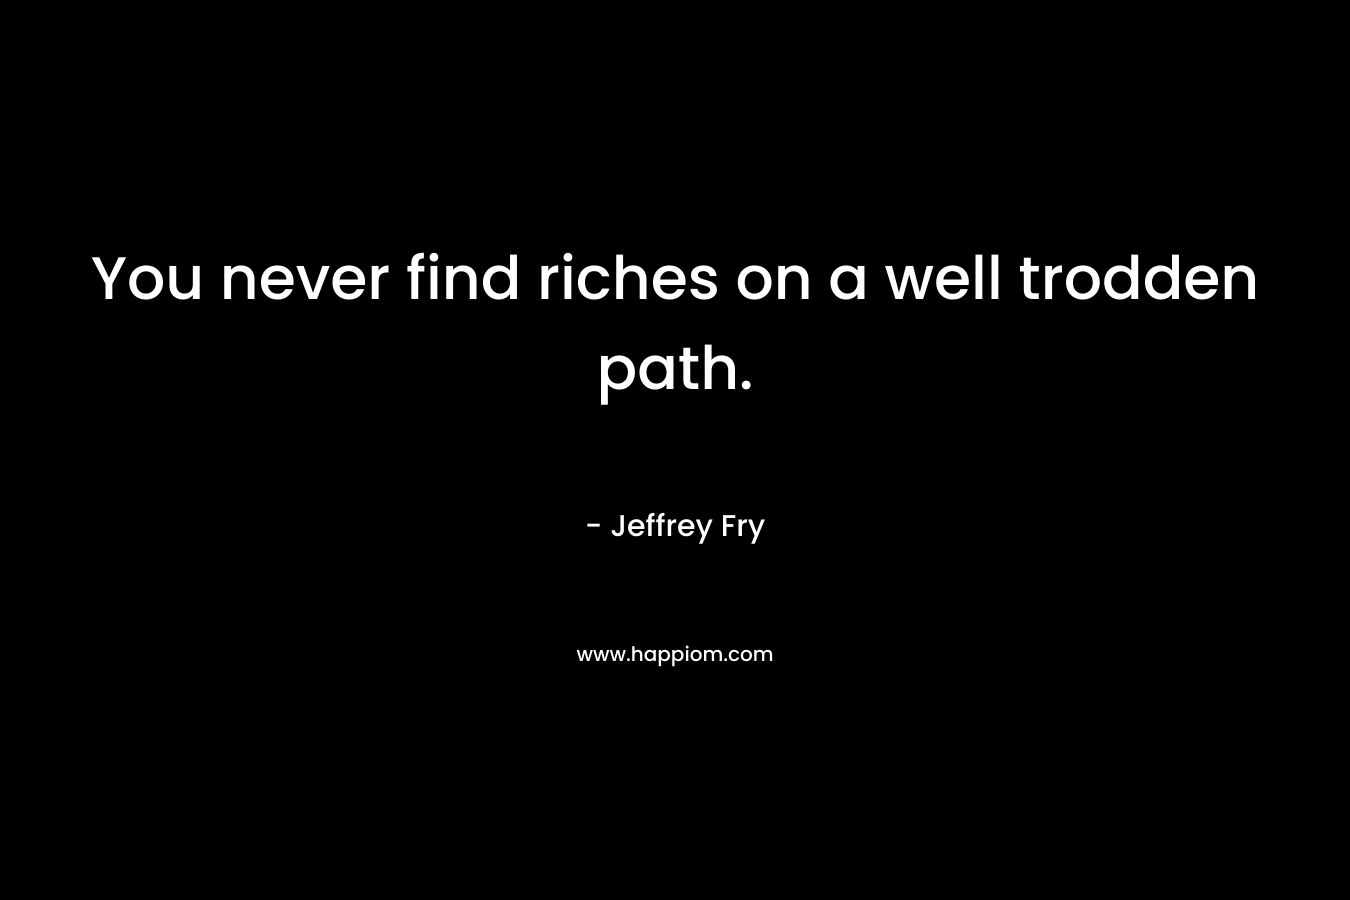 You never find riches on a well trodden path. – Jeffrey Fry